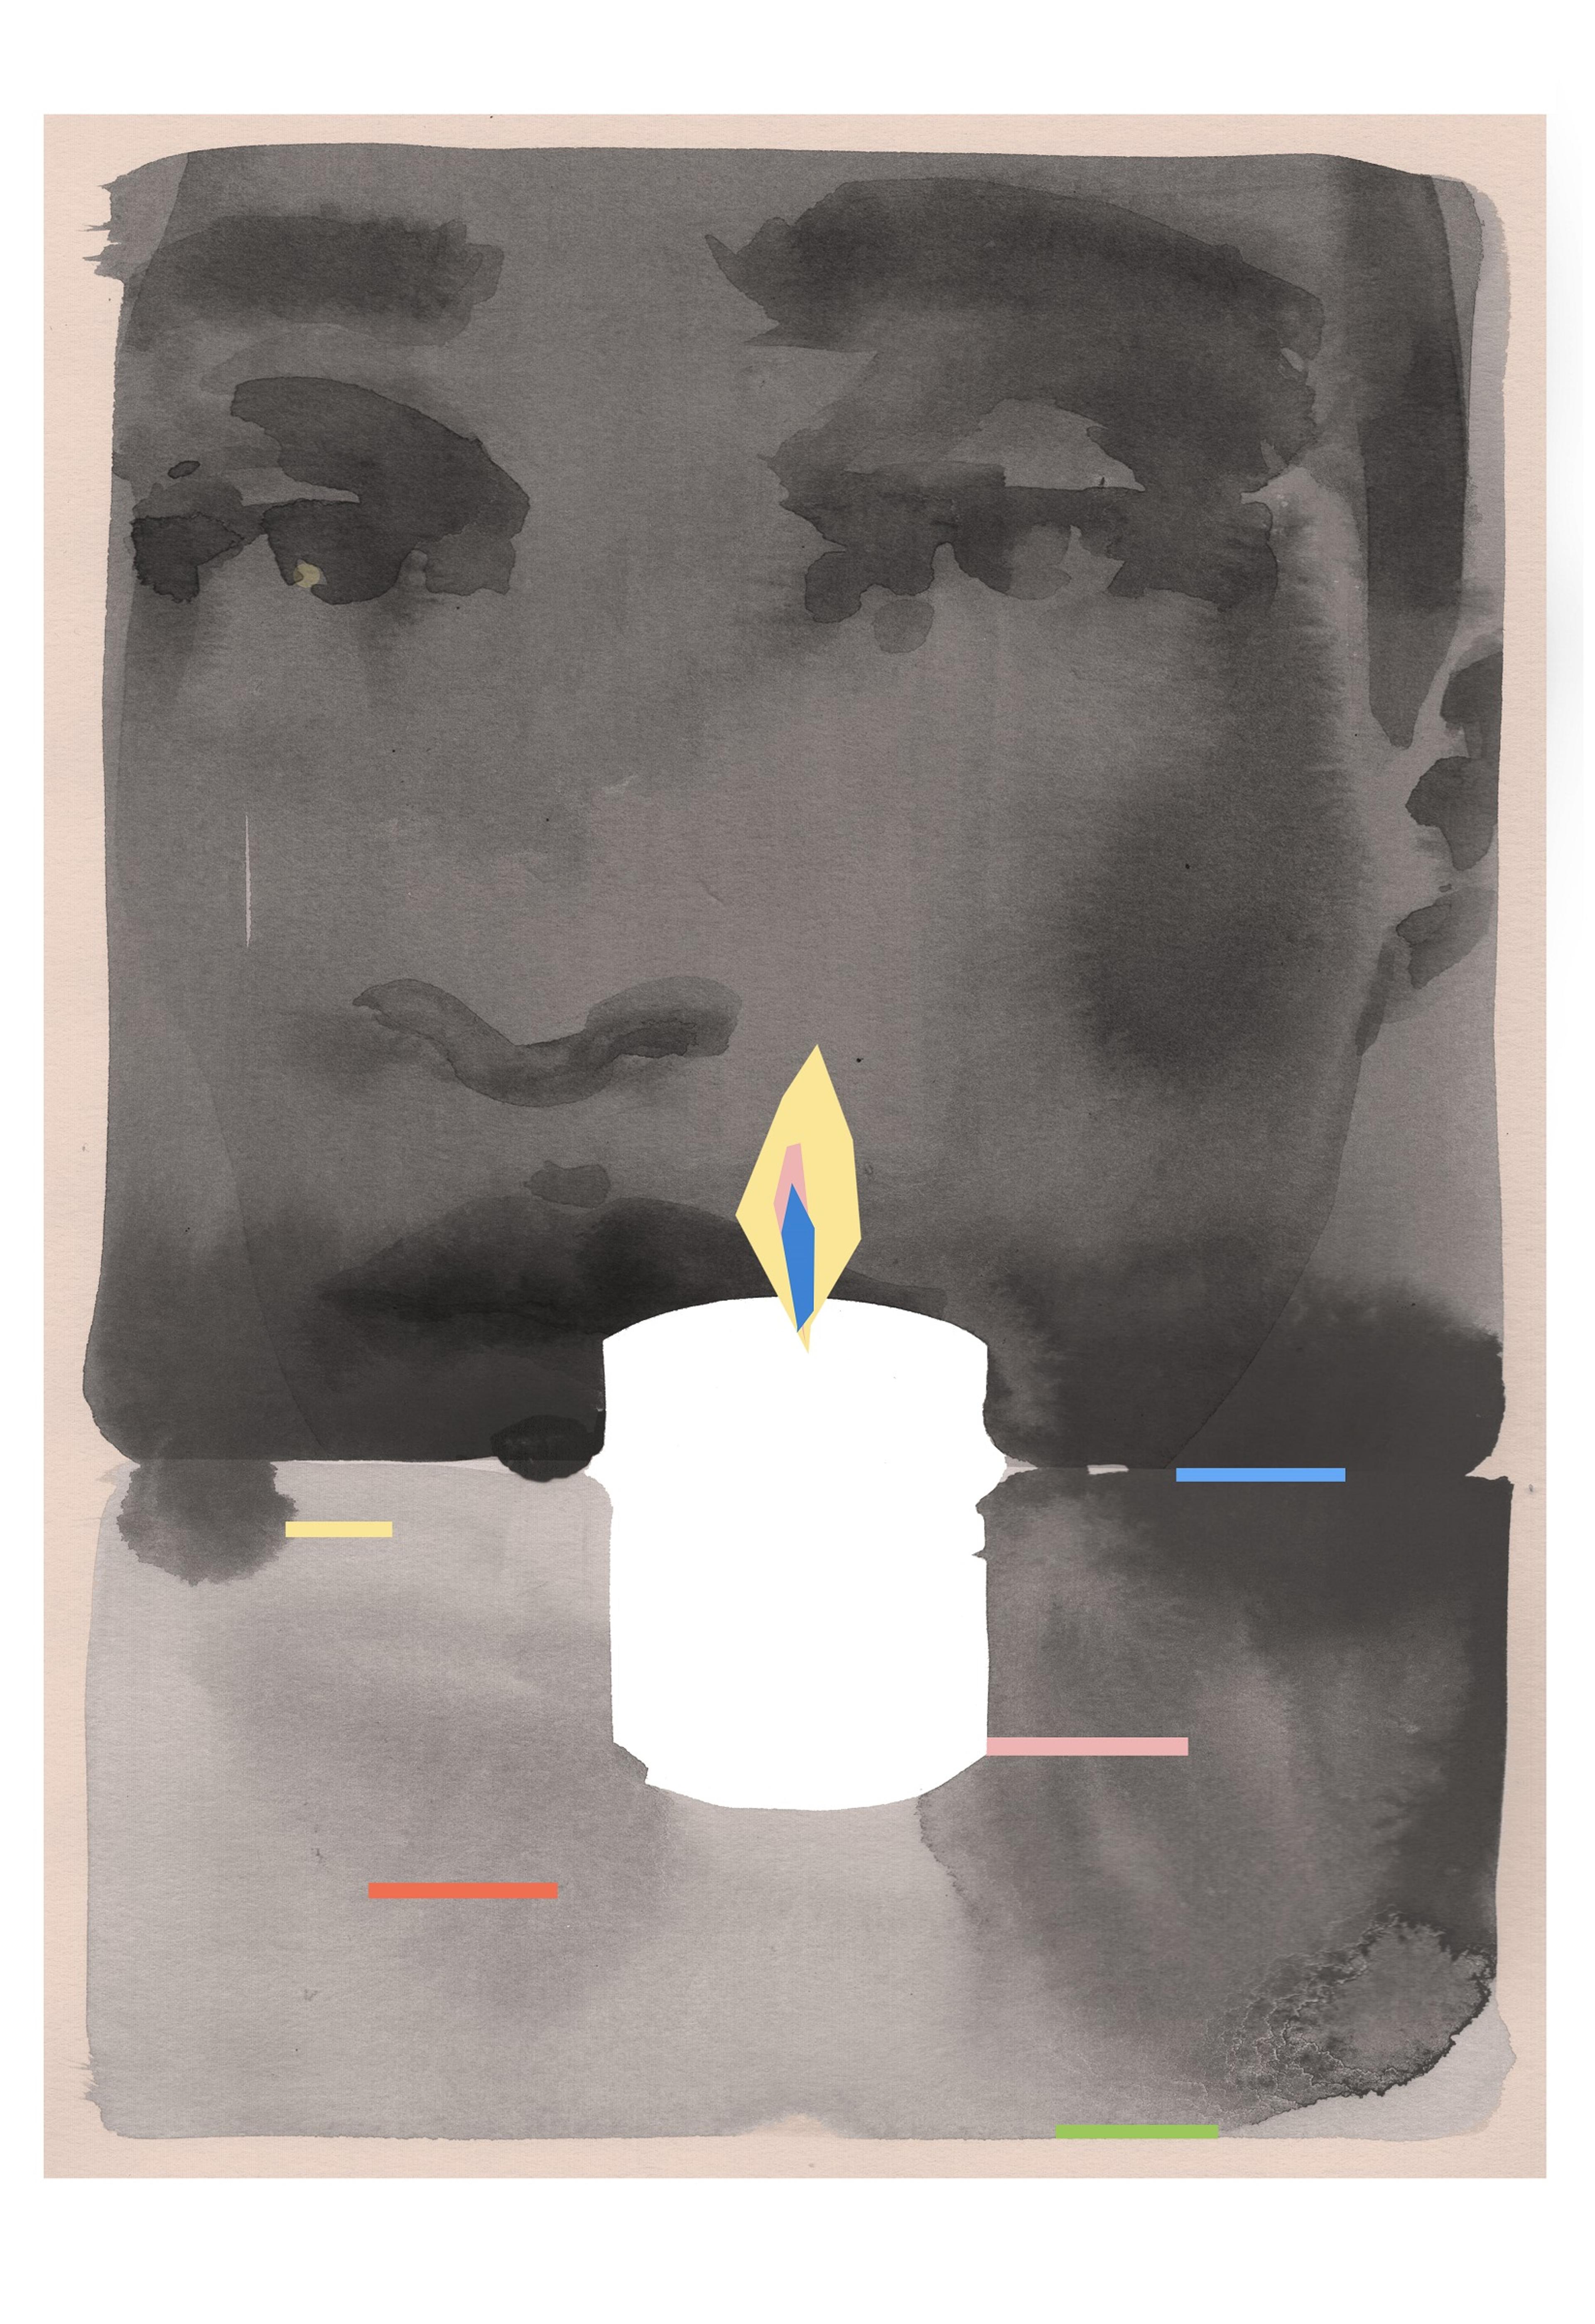 Illustration of a face looking at a candle from the shadows